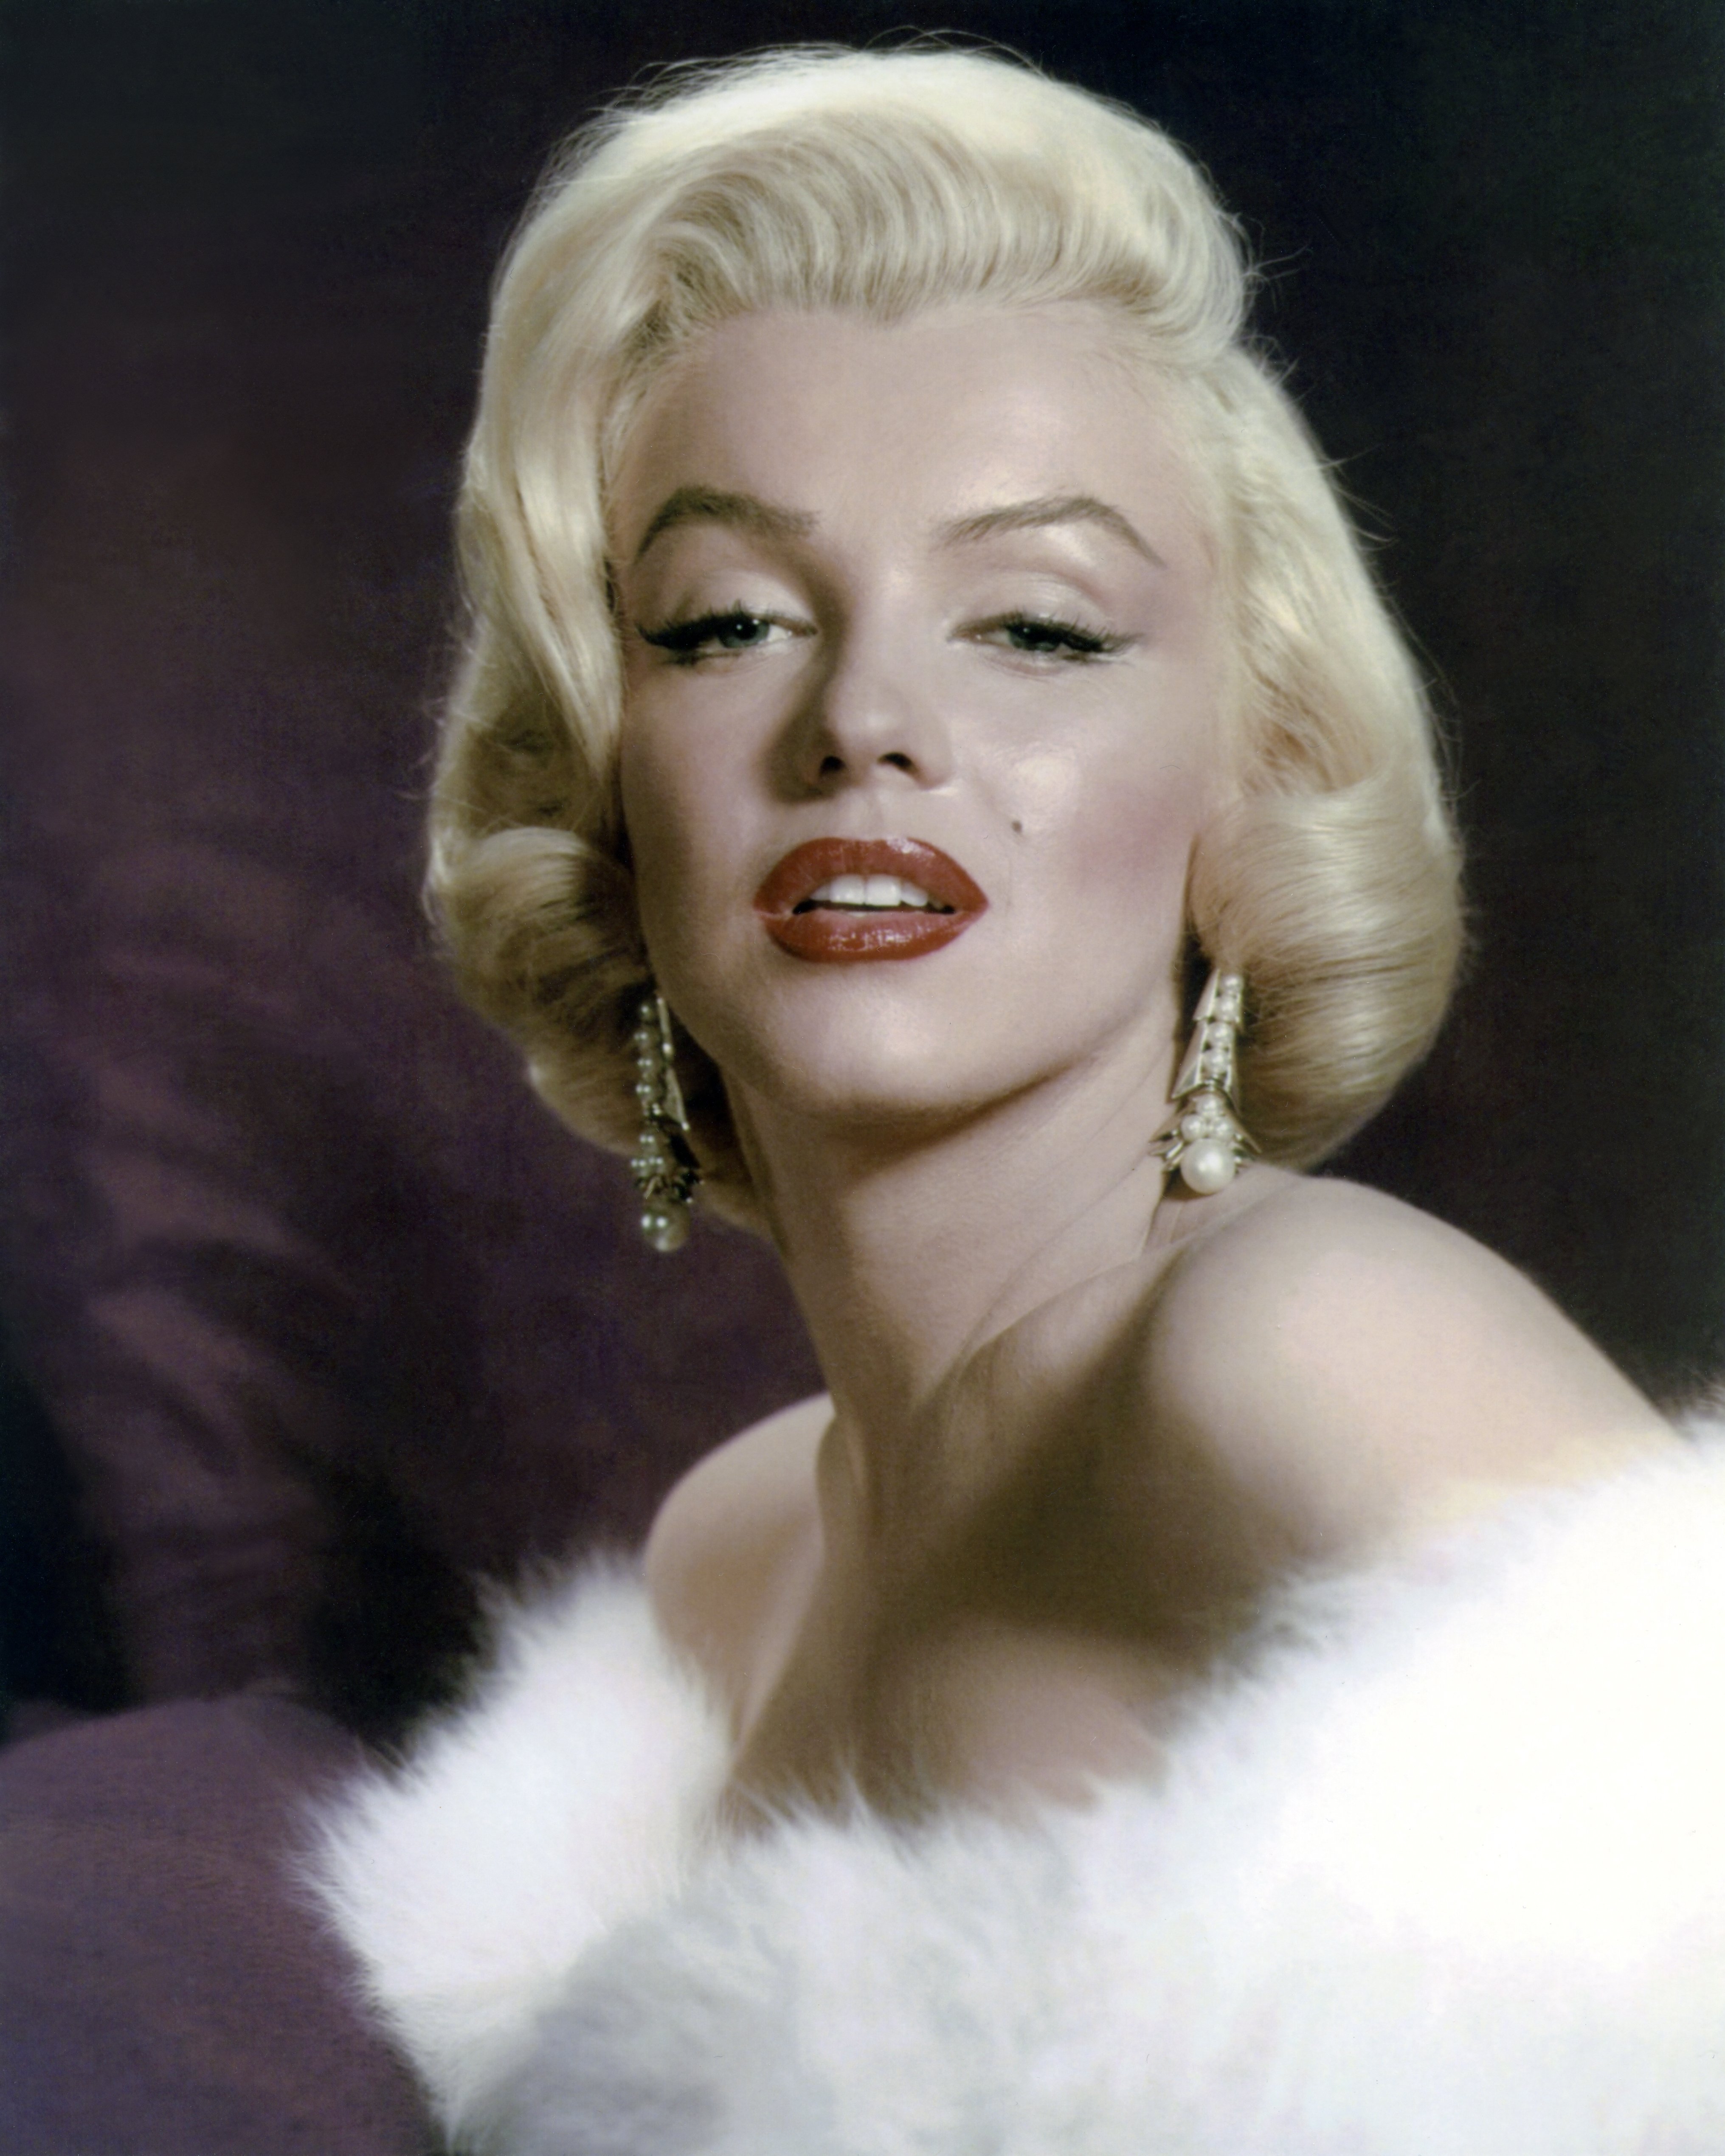 Portrait of Marilyn Monroe circa 1953 | Source: Getty Images 